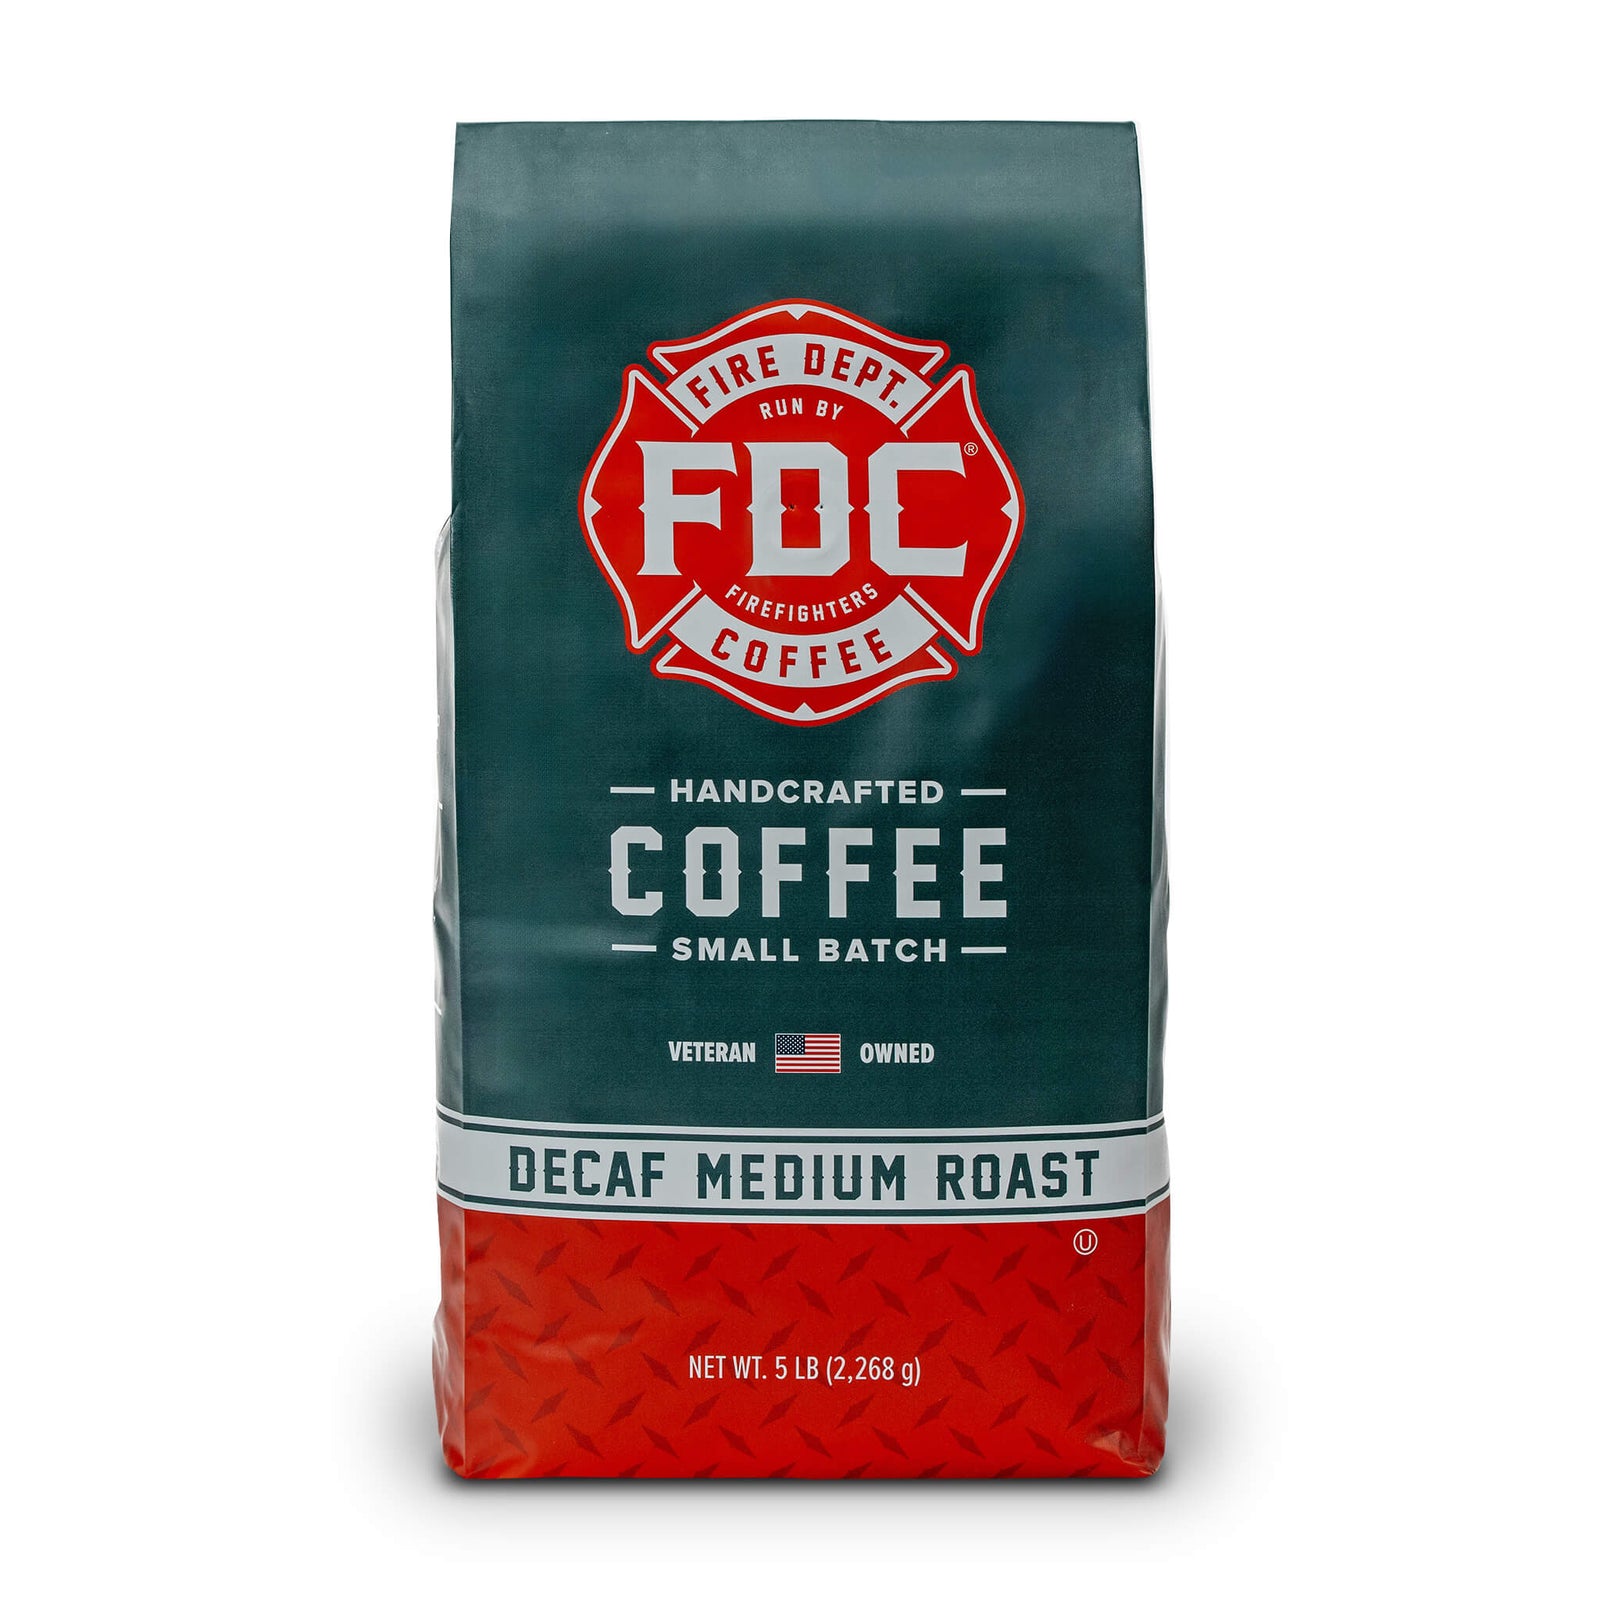 A 5lb bag of fire department coffee's decaf coffee